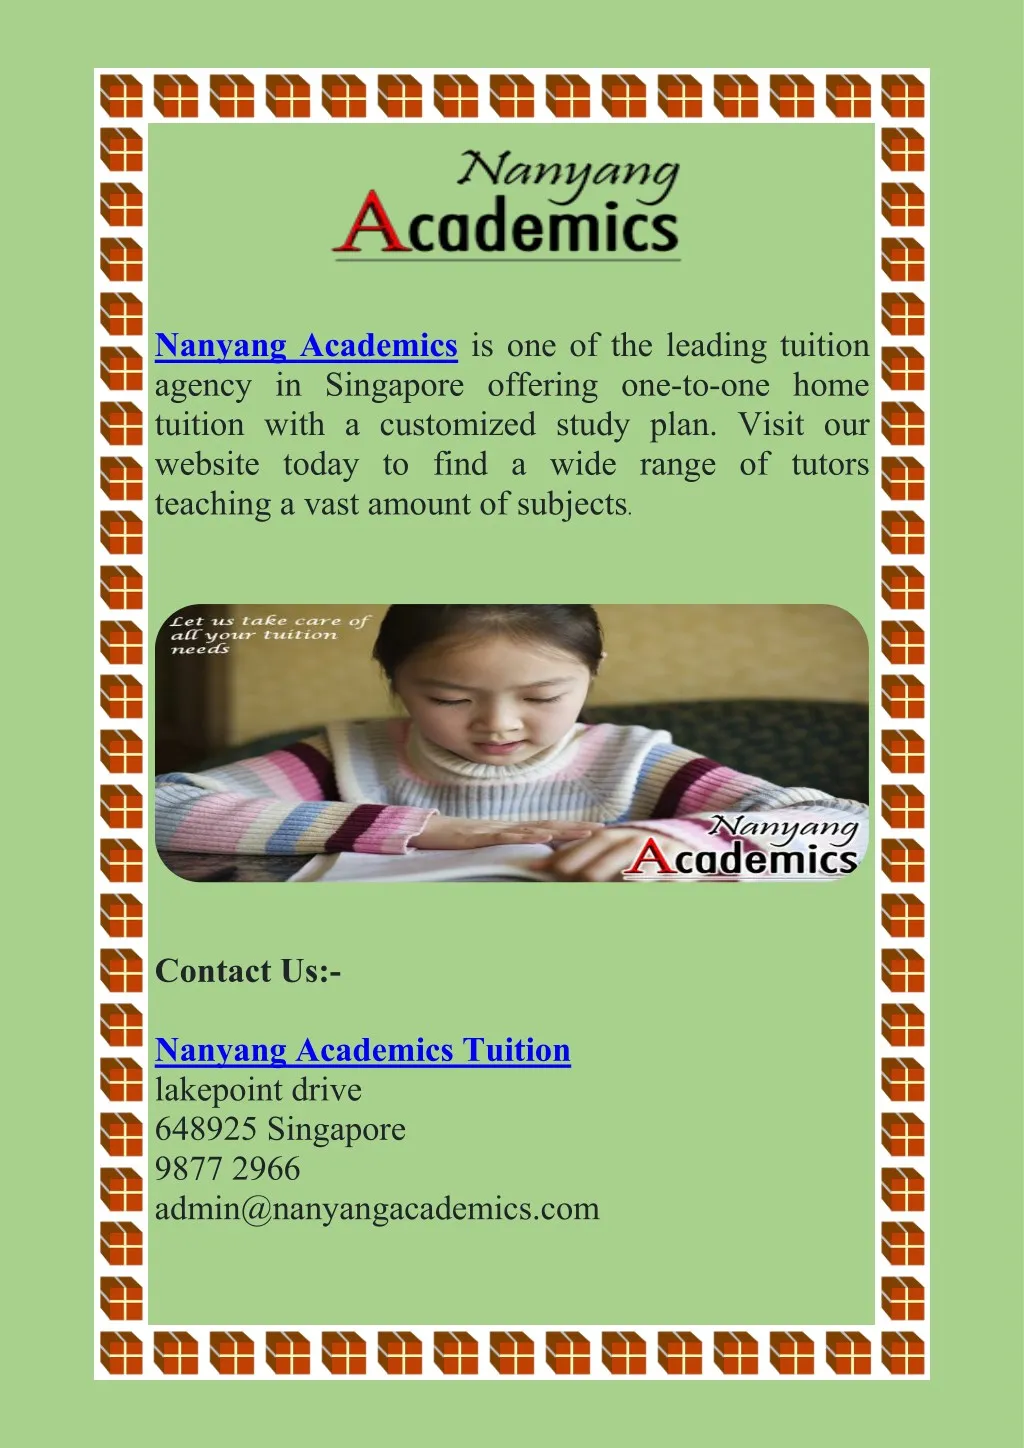 nanyang academics is one of the leading tuition